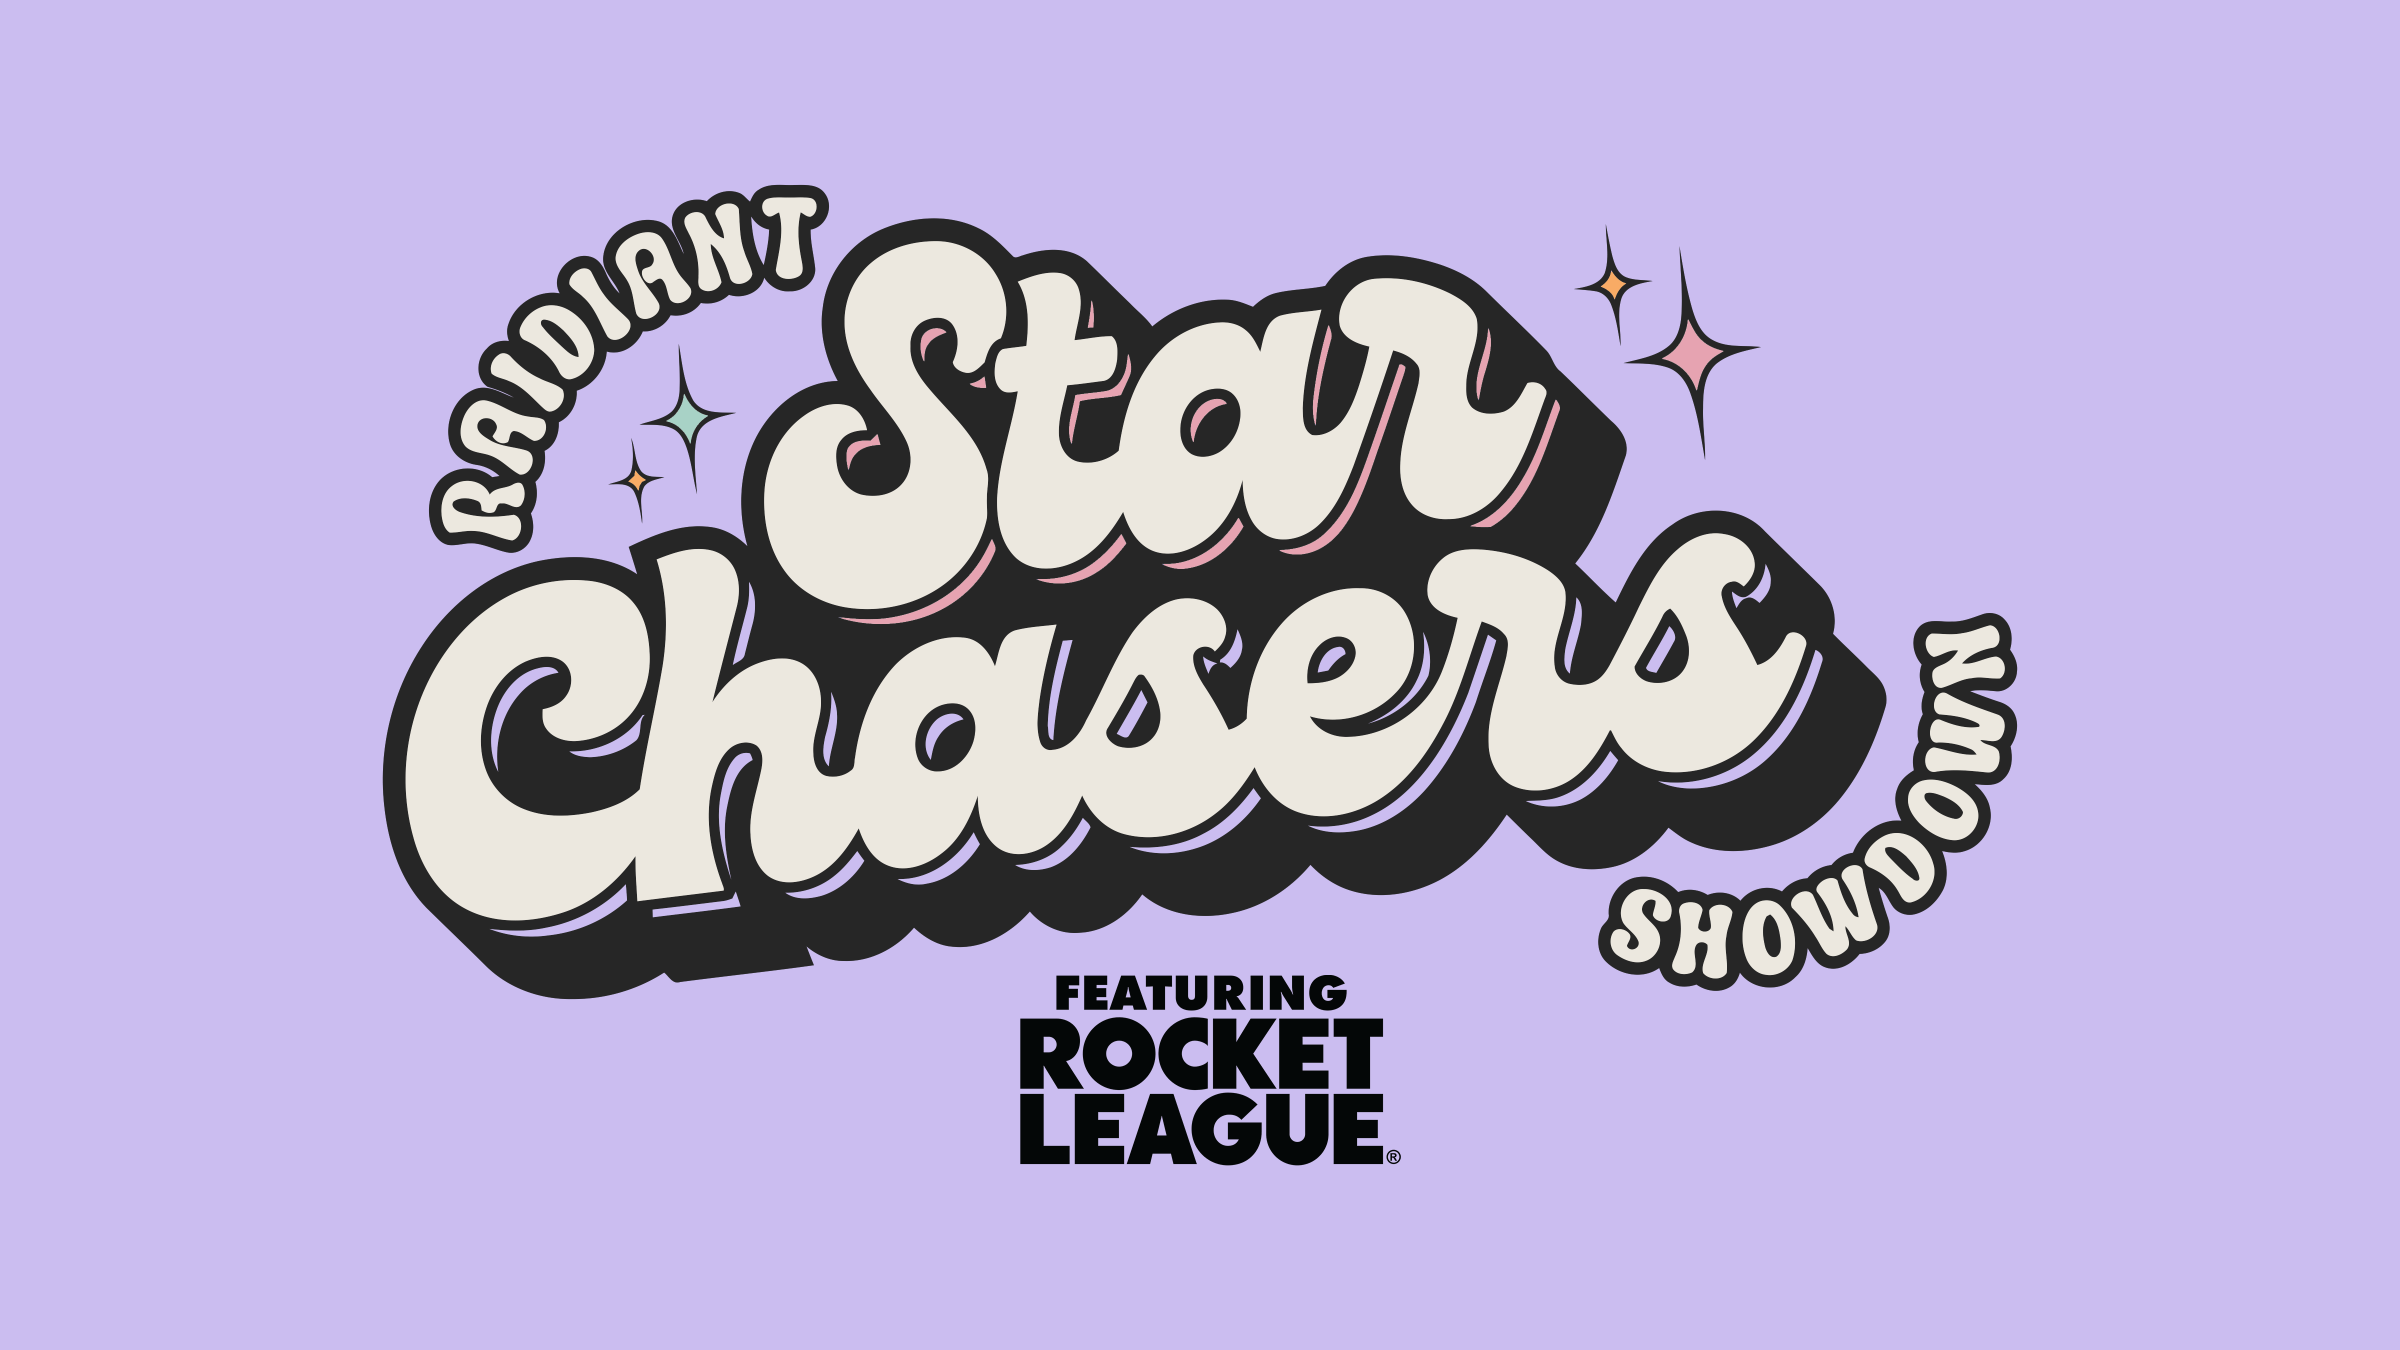 Star Chasers Showdown Event Logo